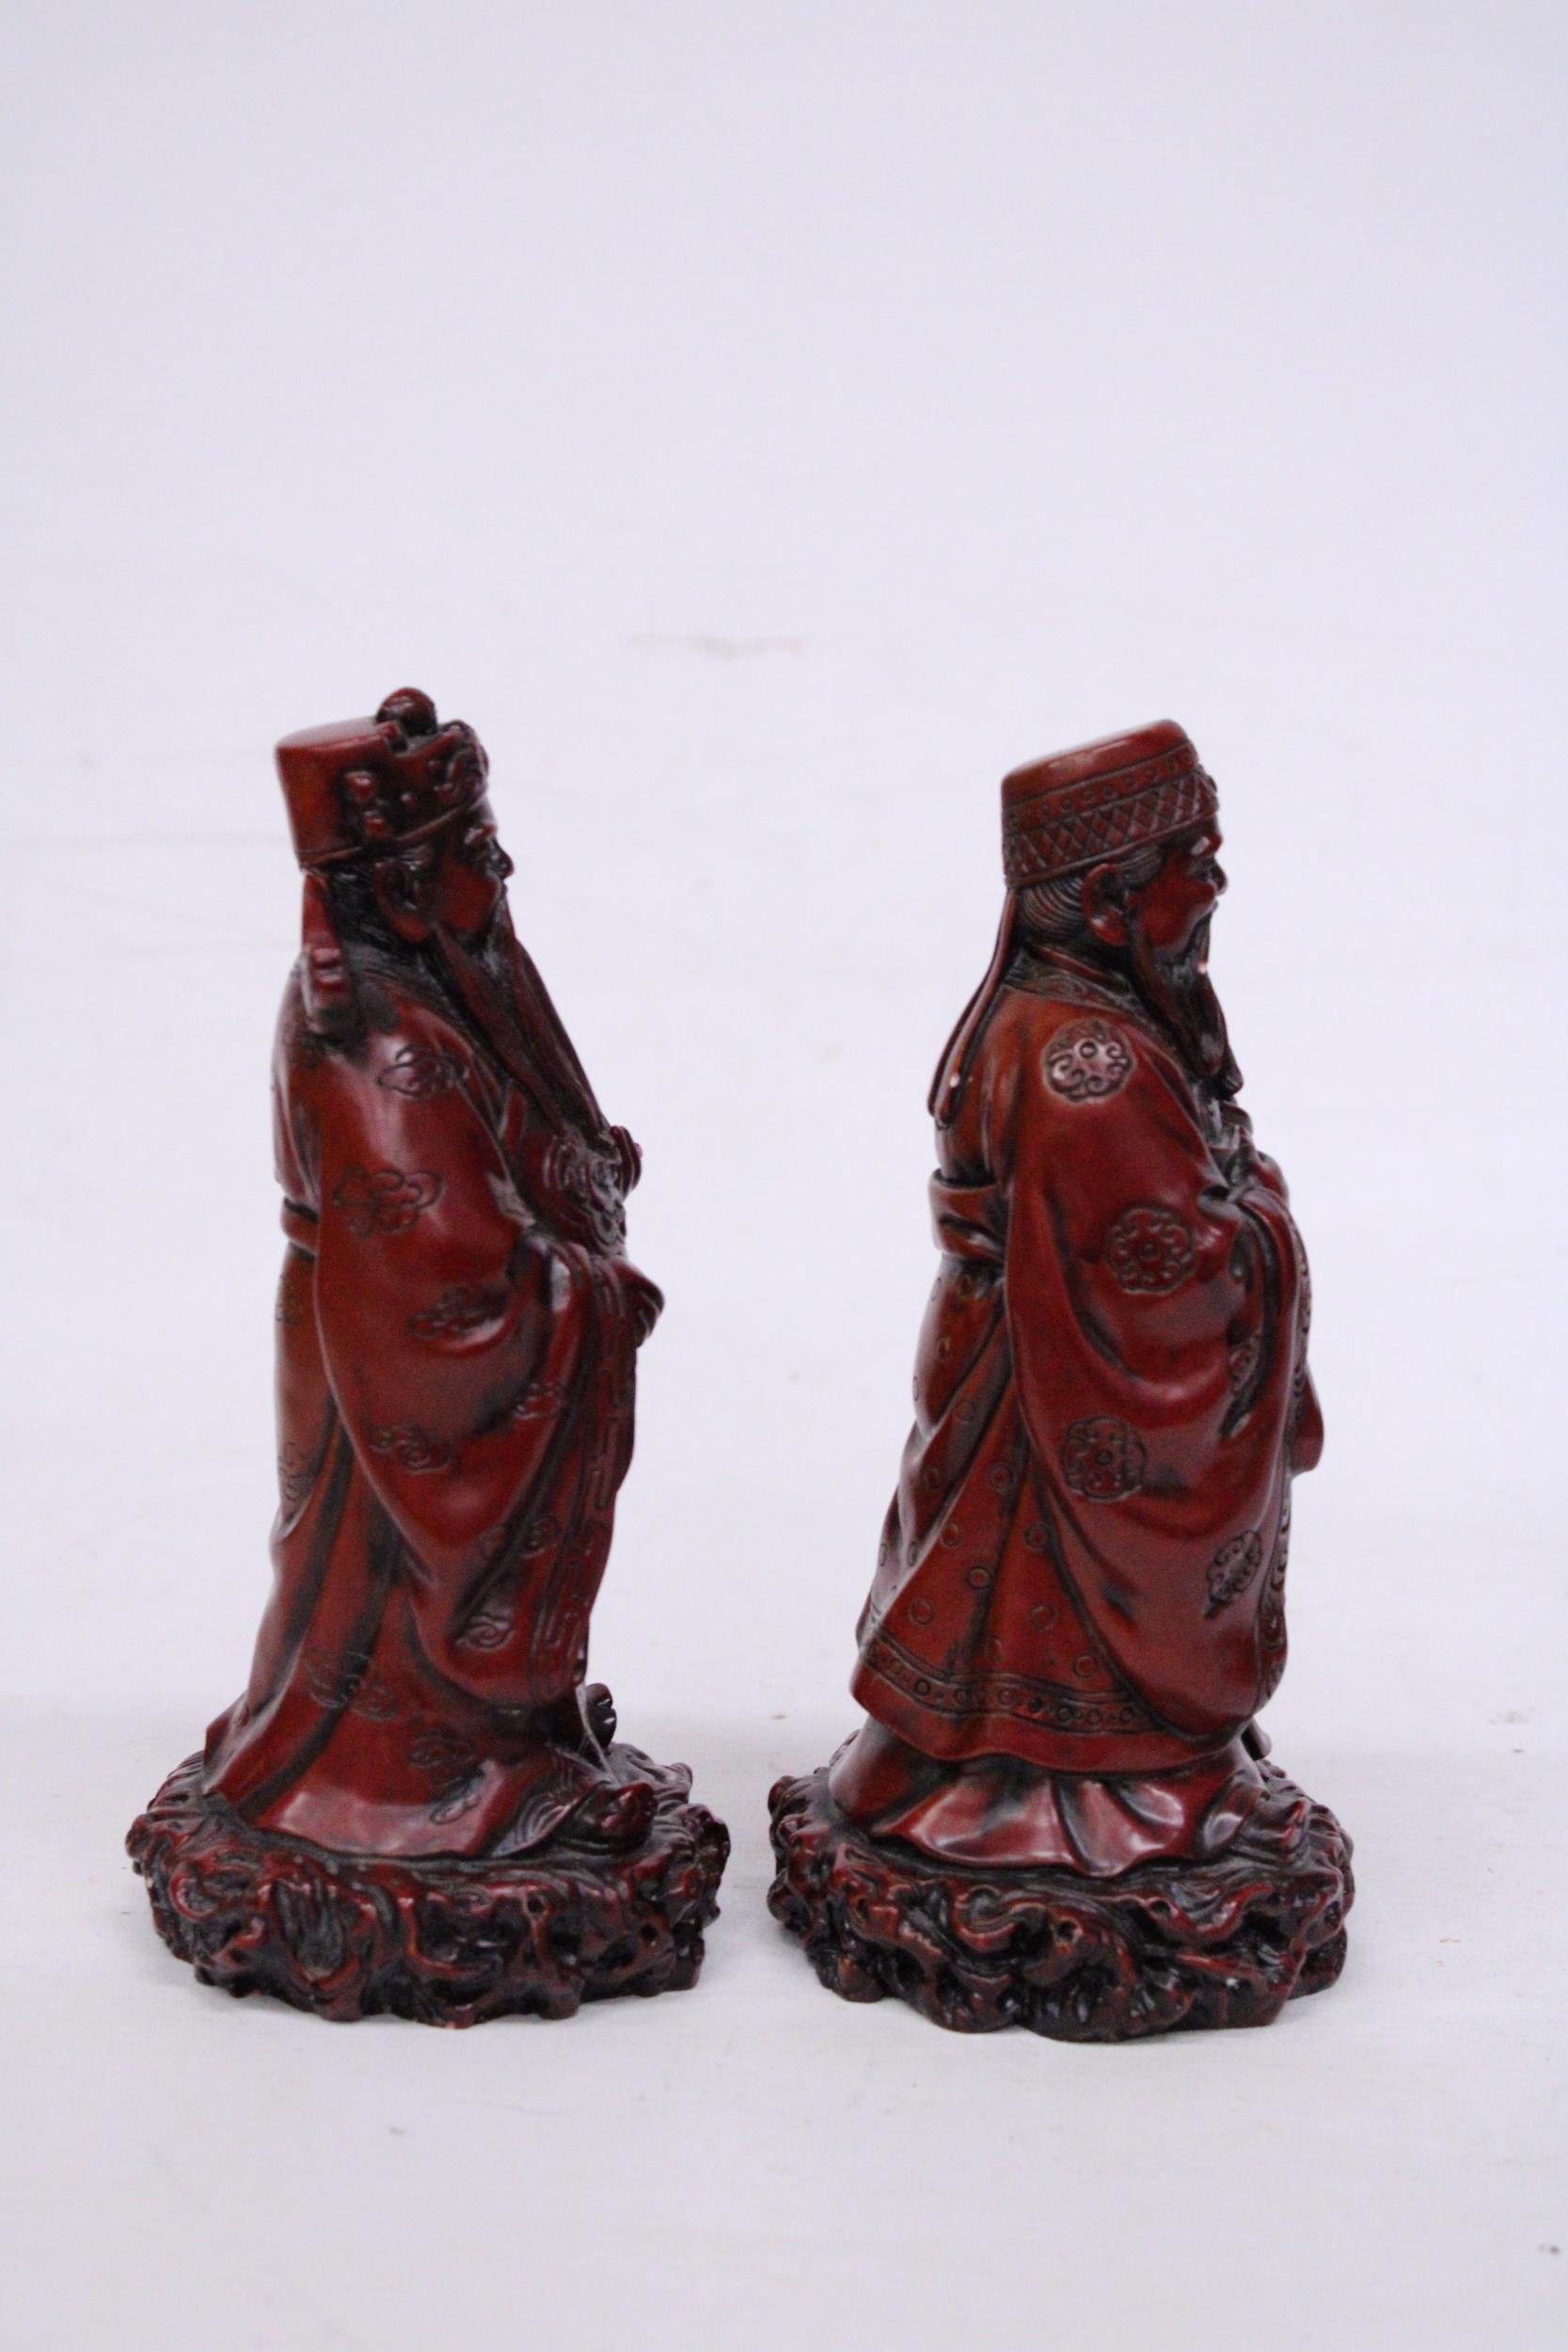 TWO HEAVY RED RESIN MANDARIN FIGURES 9 INCH (H) - Image 4 of 6